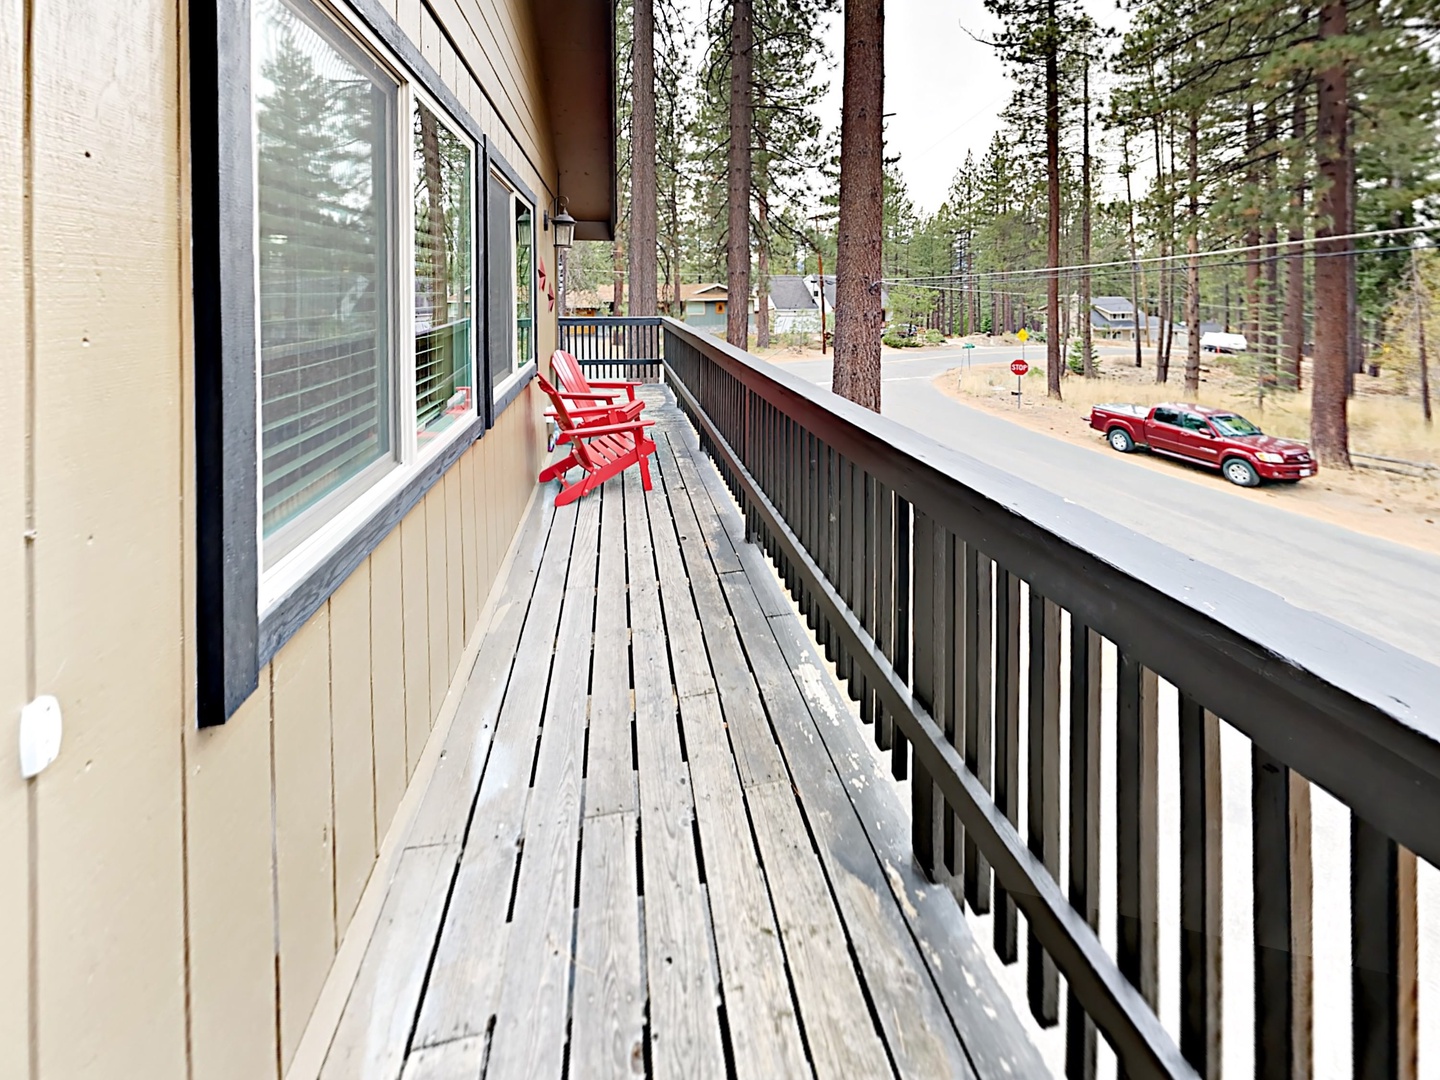 Wrap around deck with seating